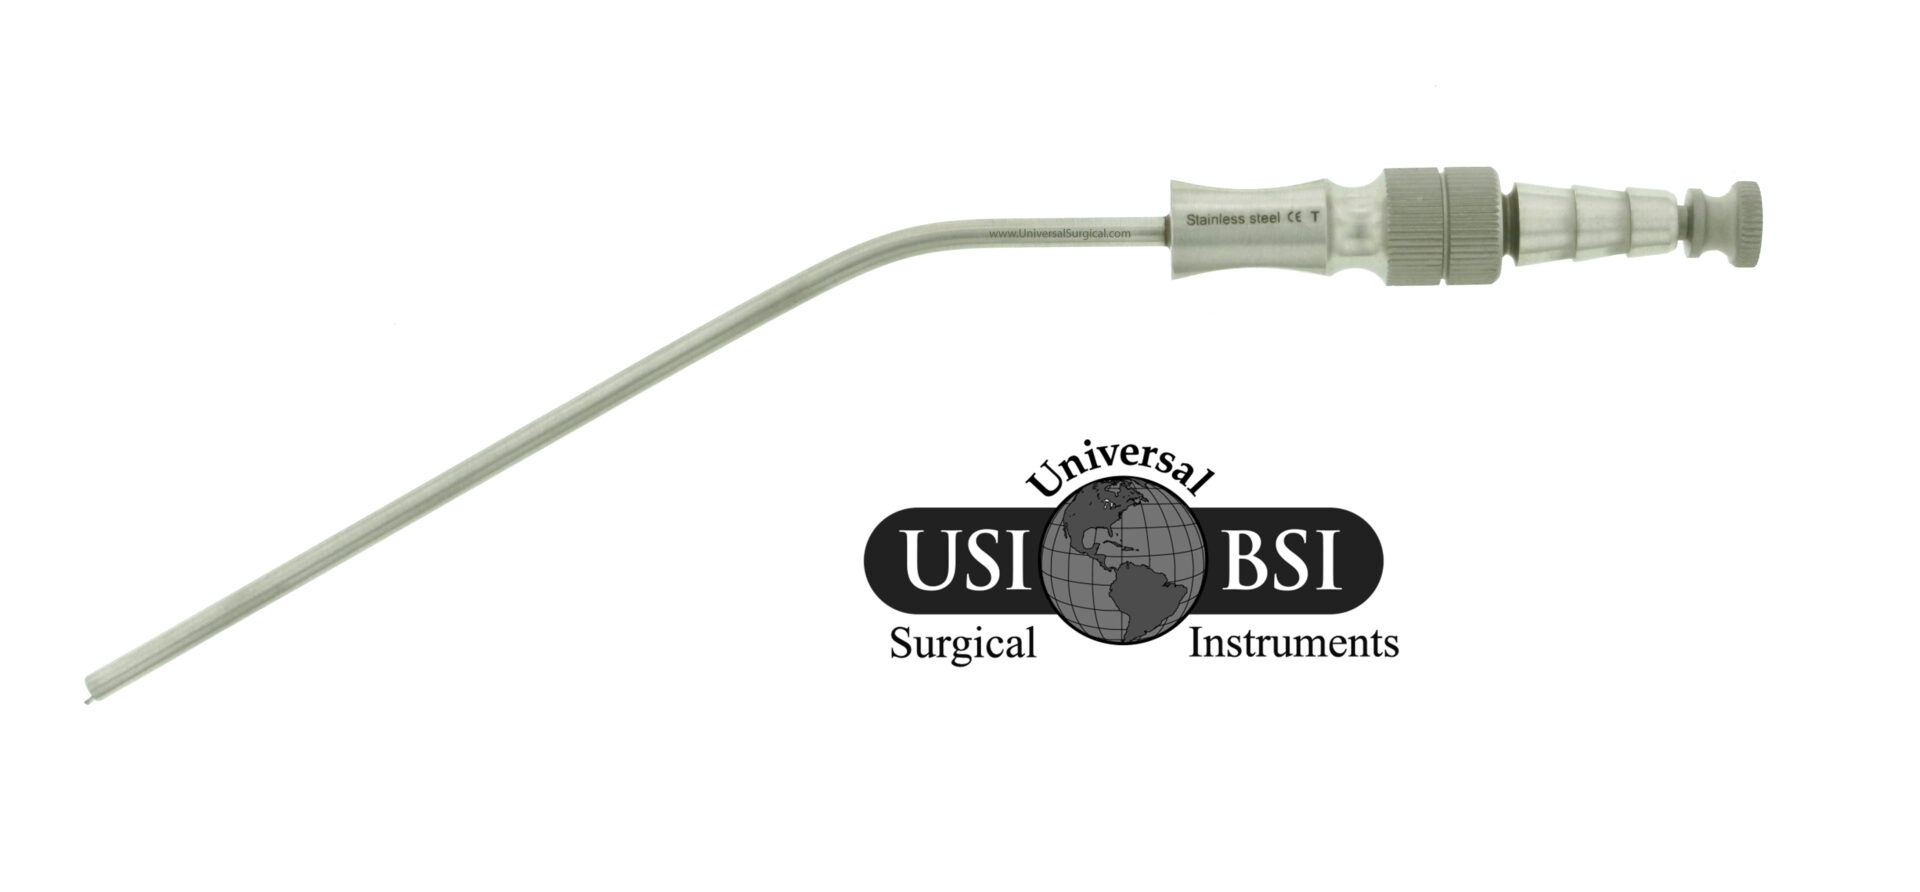 A picture of the universal bsi surgical instruments logo.